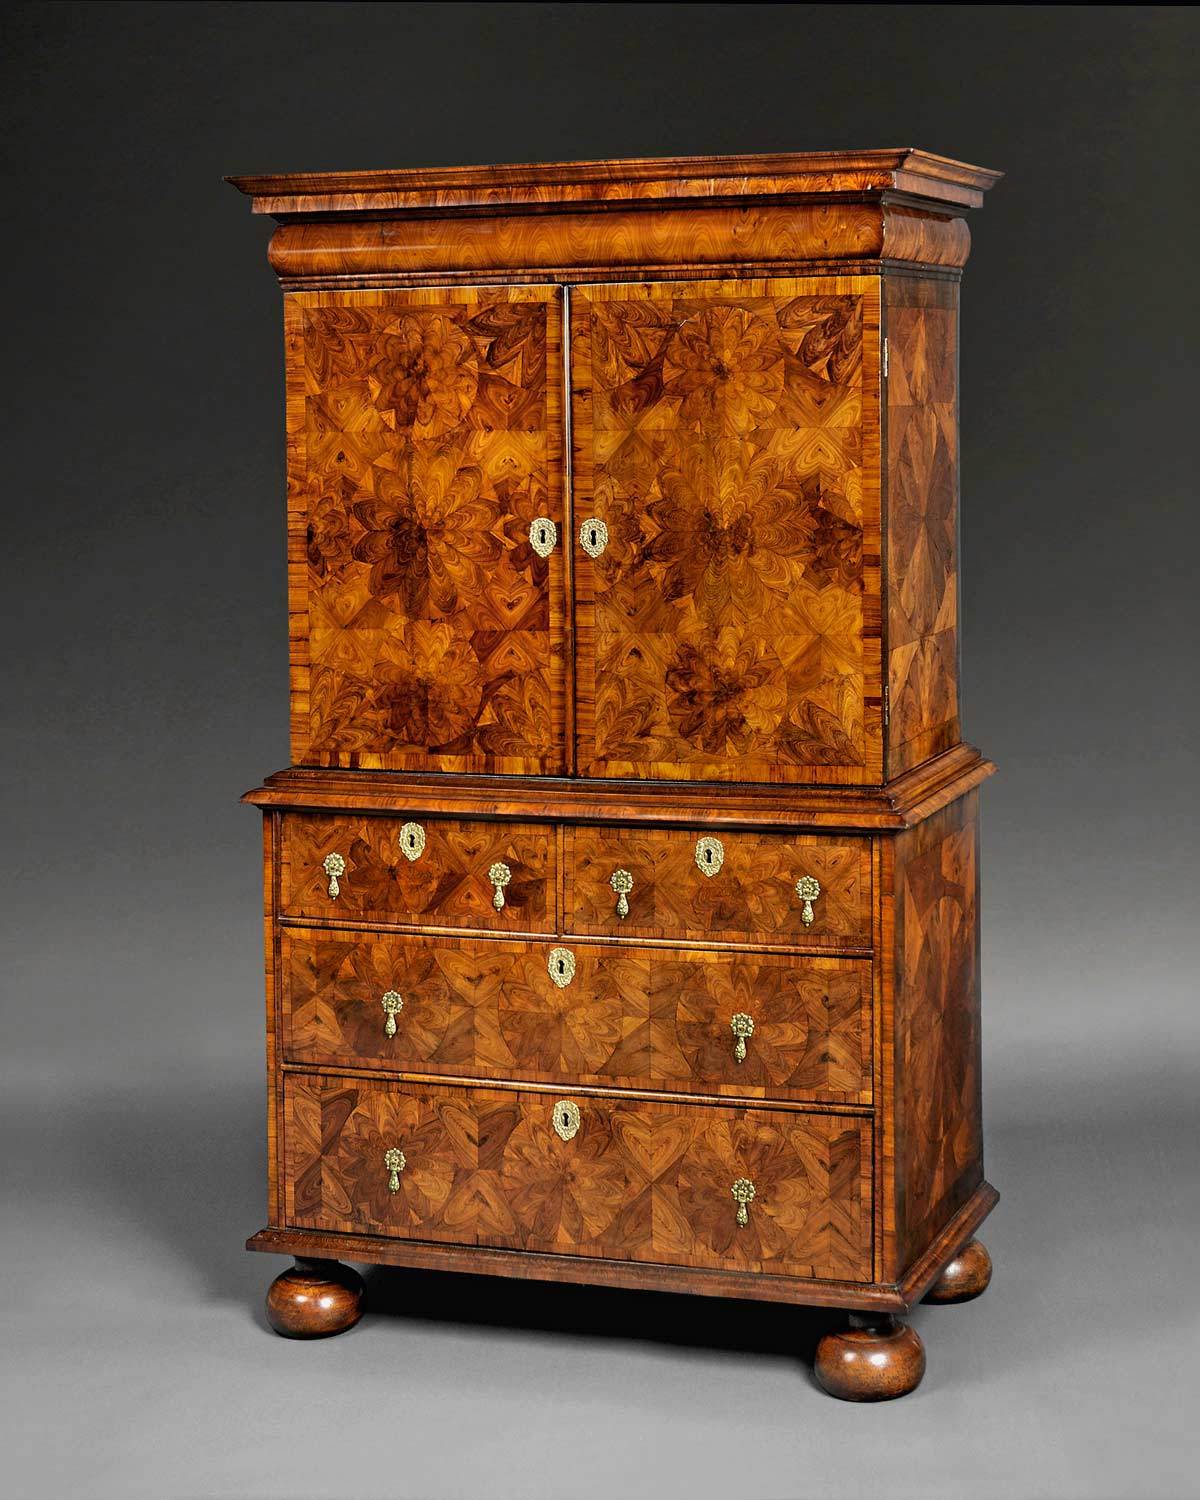 An extraordinary William and Mary period Kingwood Oyster veneered Rosewood Crossbanded Cabinet on Chest by Thomas Pistor, the moulded top above a bolection moulded secret drawer, oyster veneered to resemble a wave motion and above two doors each